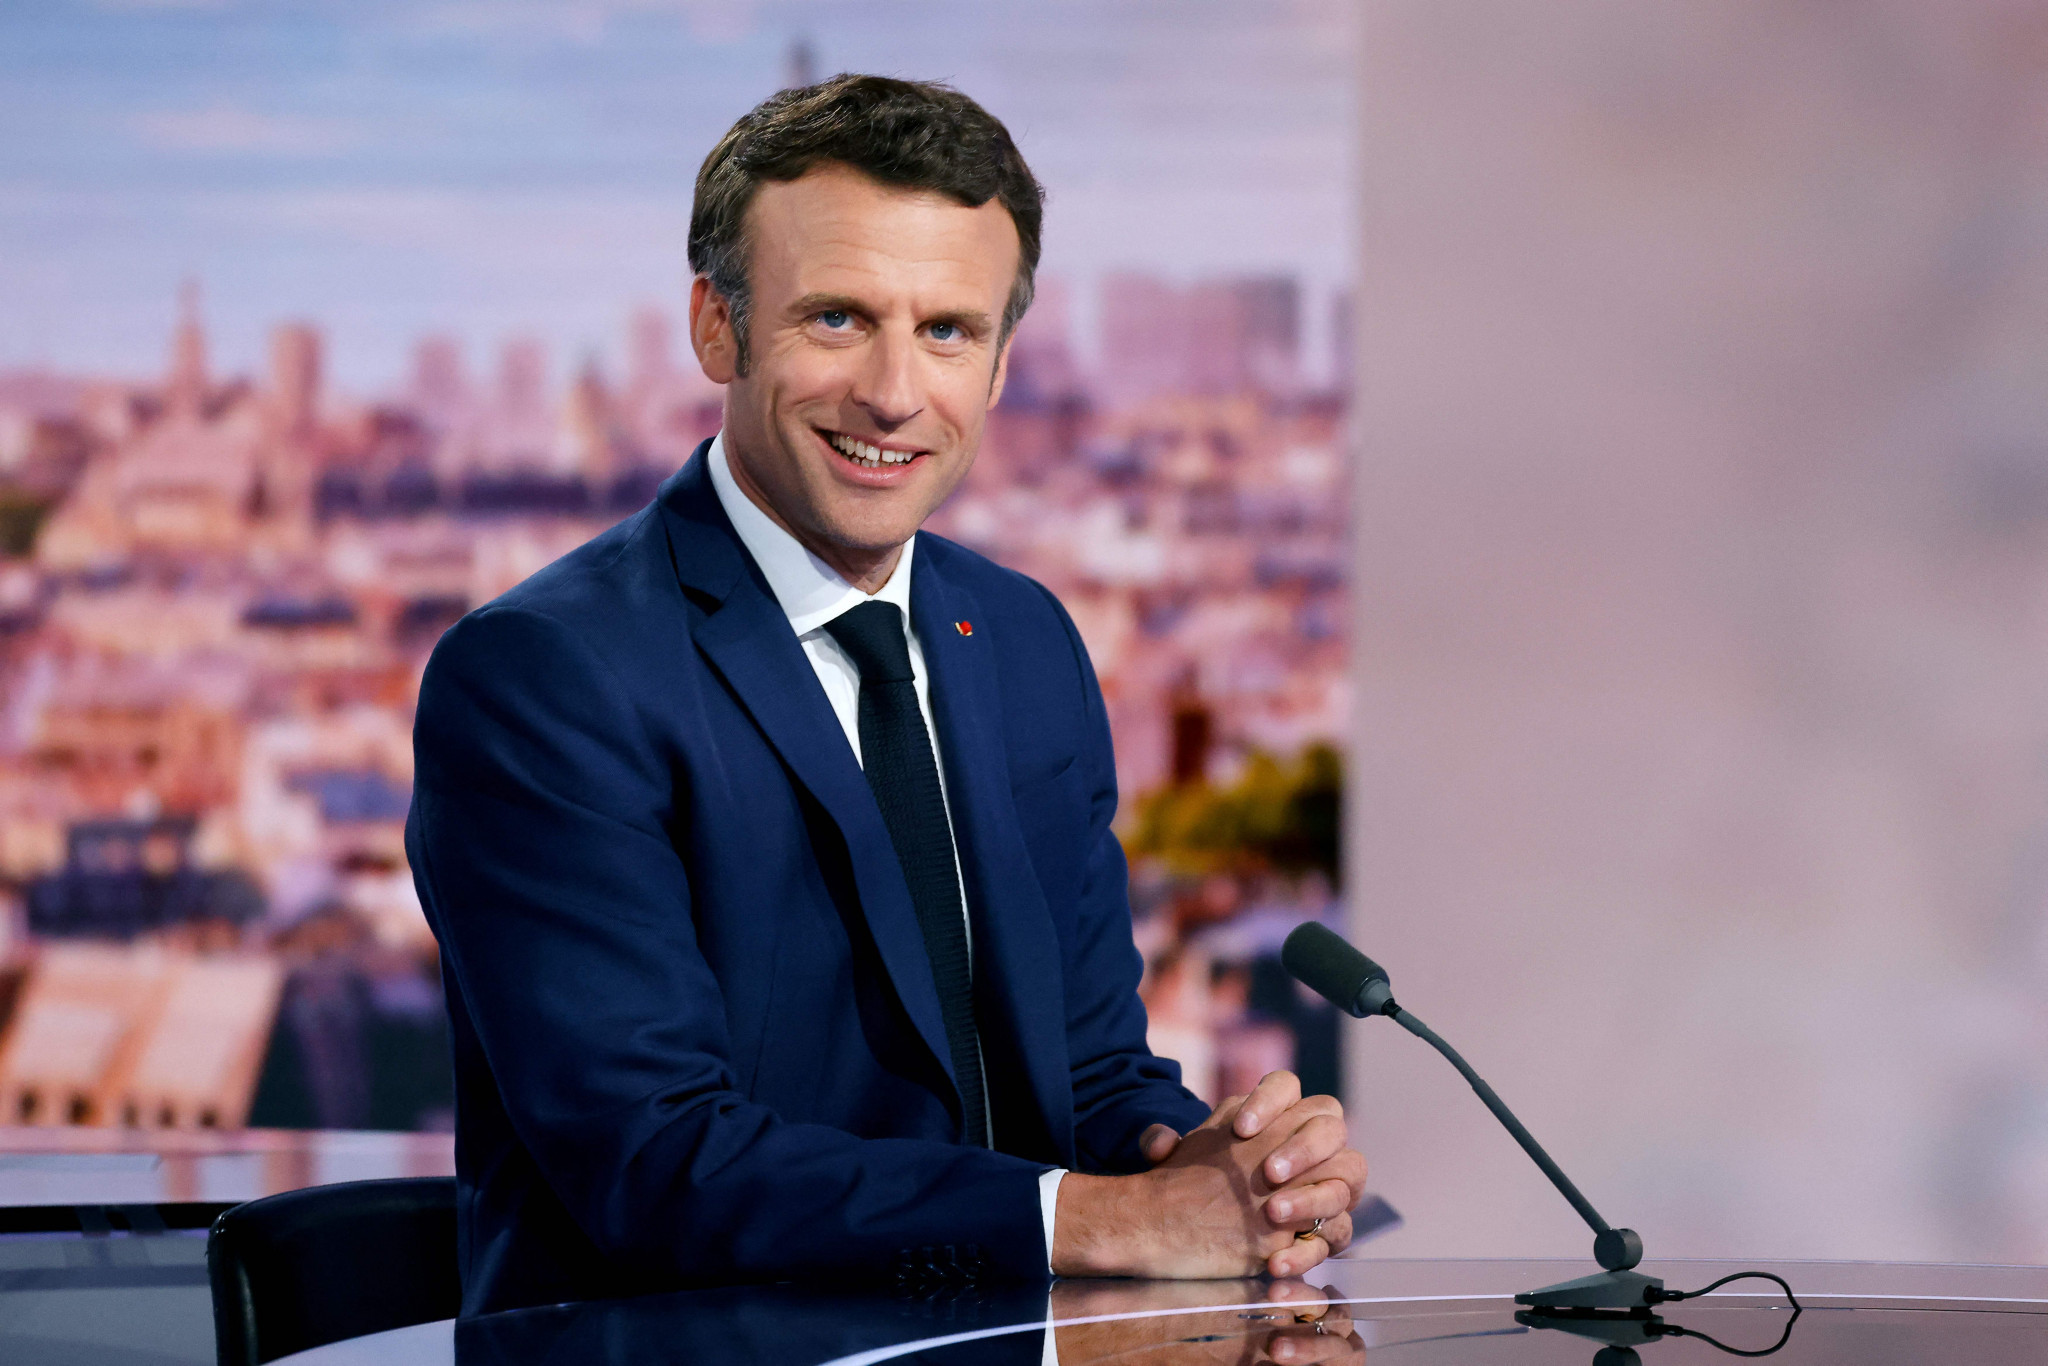 French President Emmanuel Macron said the Paris 2024 Olympics is "a historic opportunity" for esports in France ©Getty Images